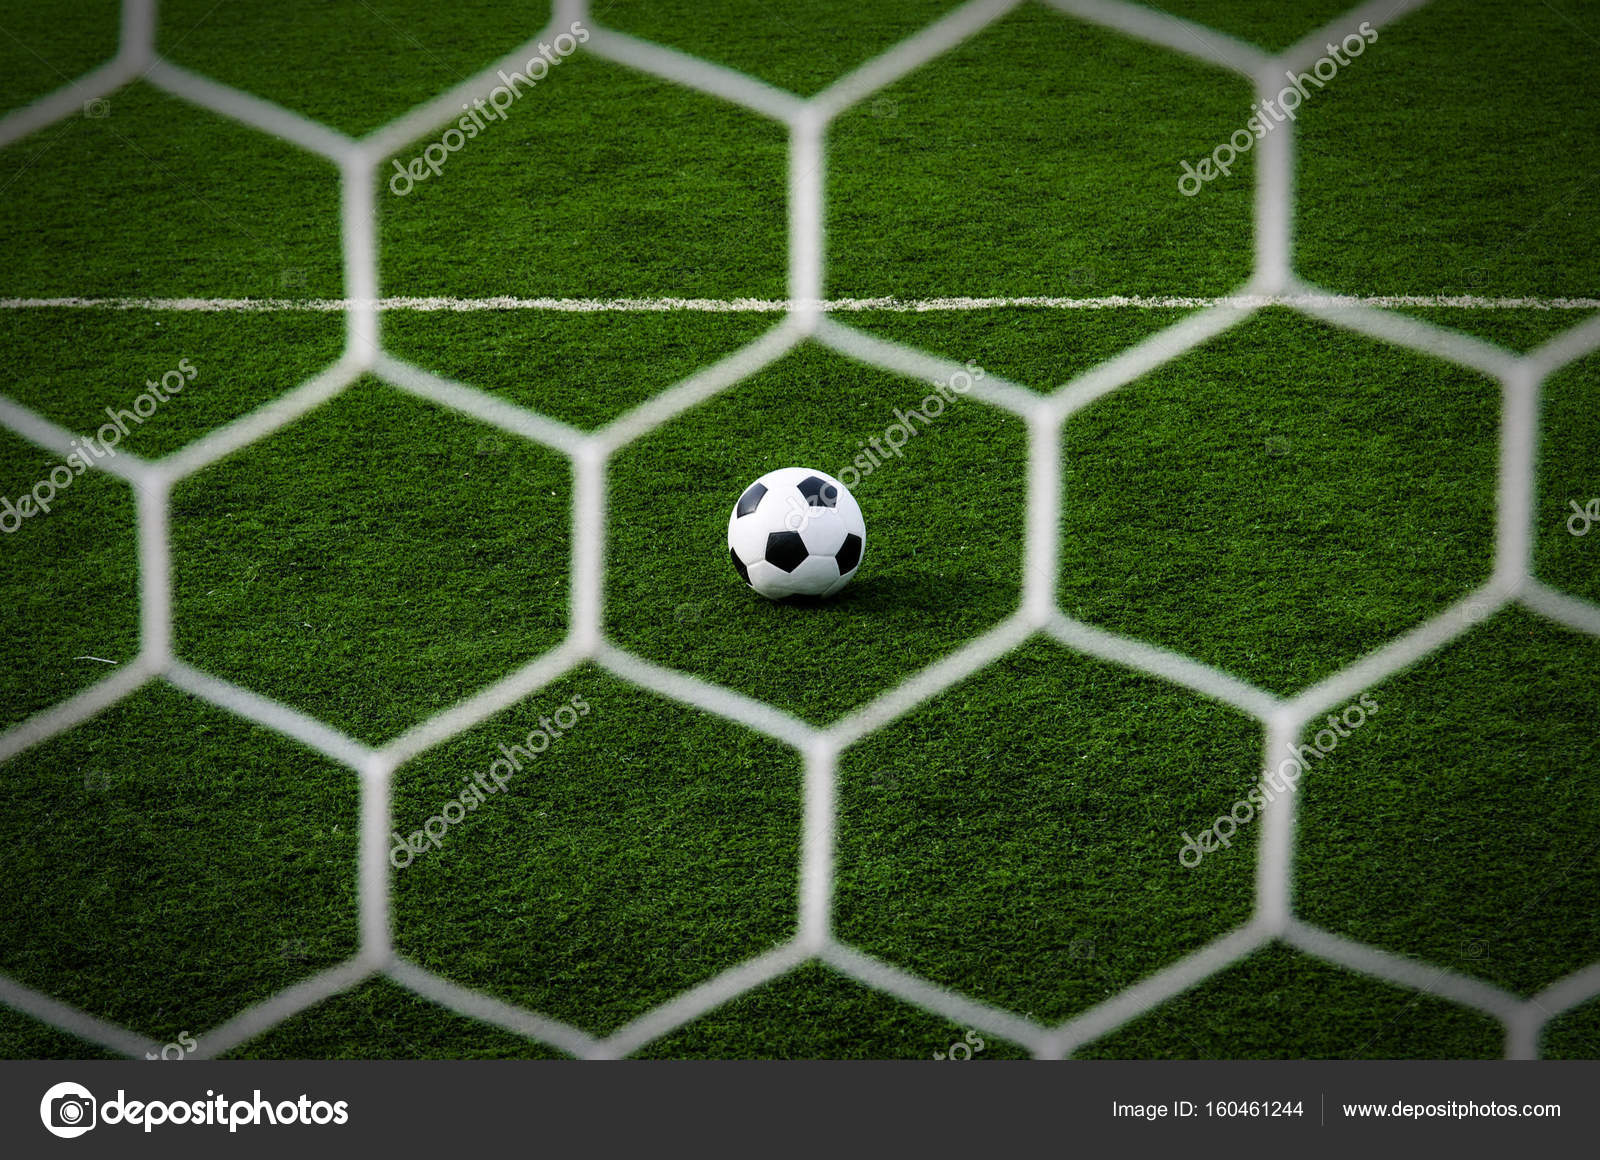 Soccer Football In Goal Net With Green Grass Field Stock Photo, Picture and  Royalty Free Image. Image 18002764.